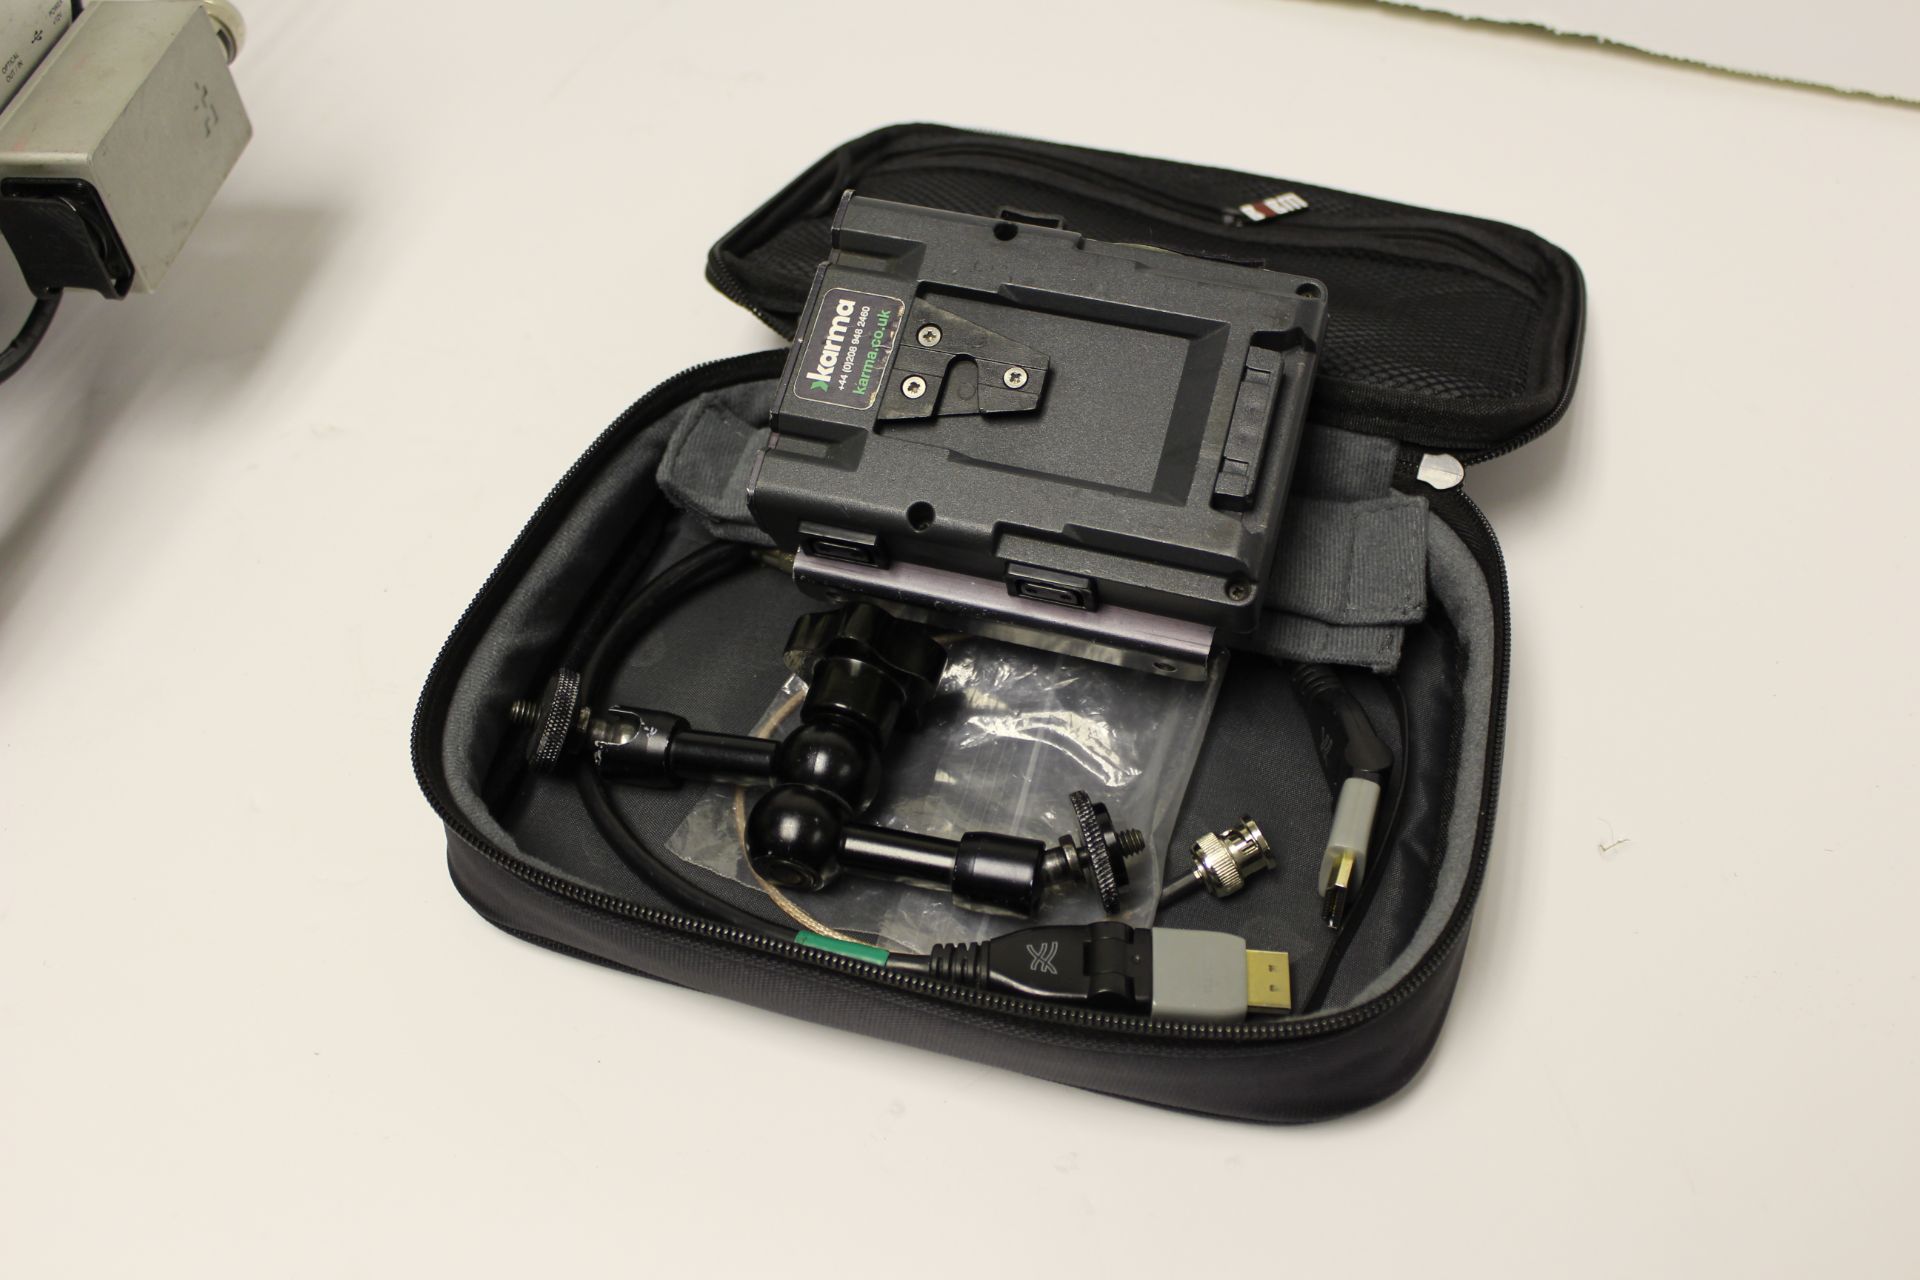 Blackmagic URSA Broadcast G2 Camera Body with View Finder, Small Rig, Hawk-woods V-Loc Battery, ATEM - Image 3 of 4